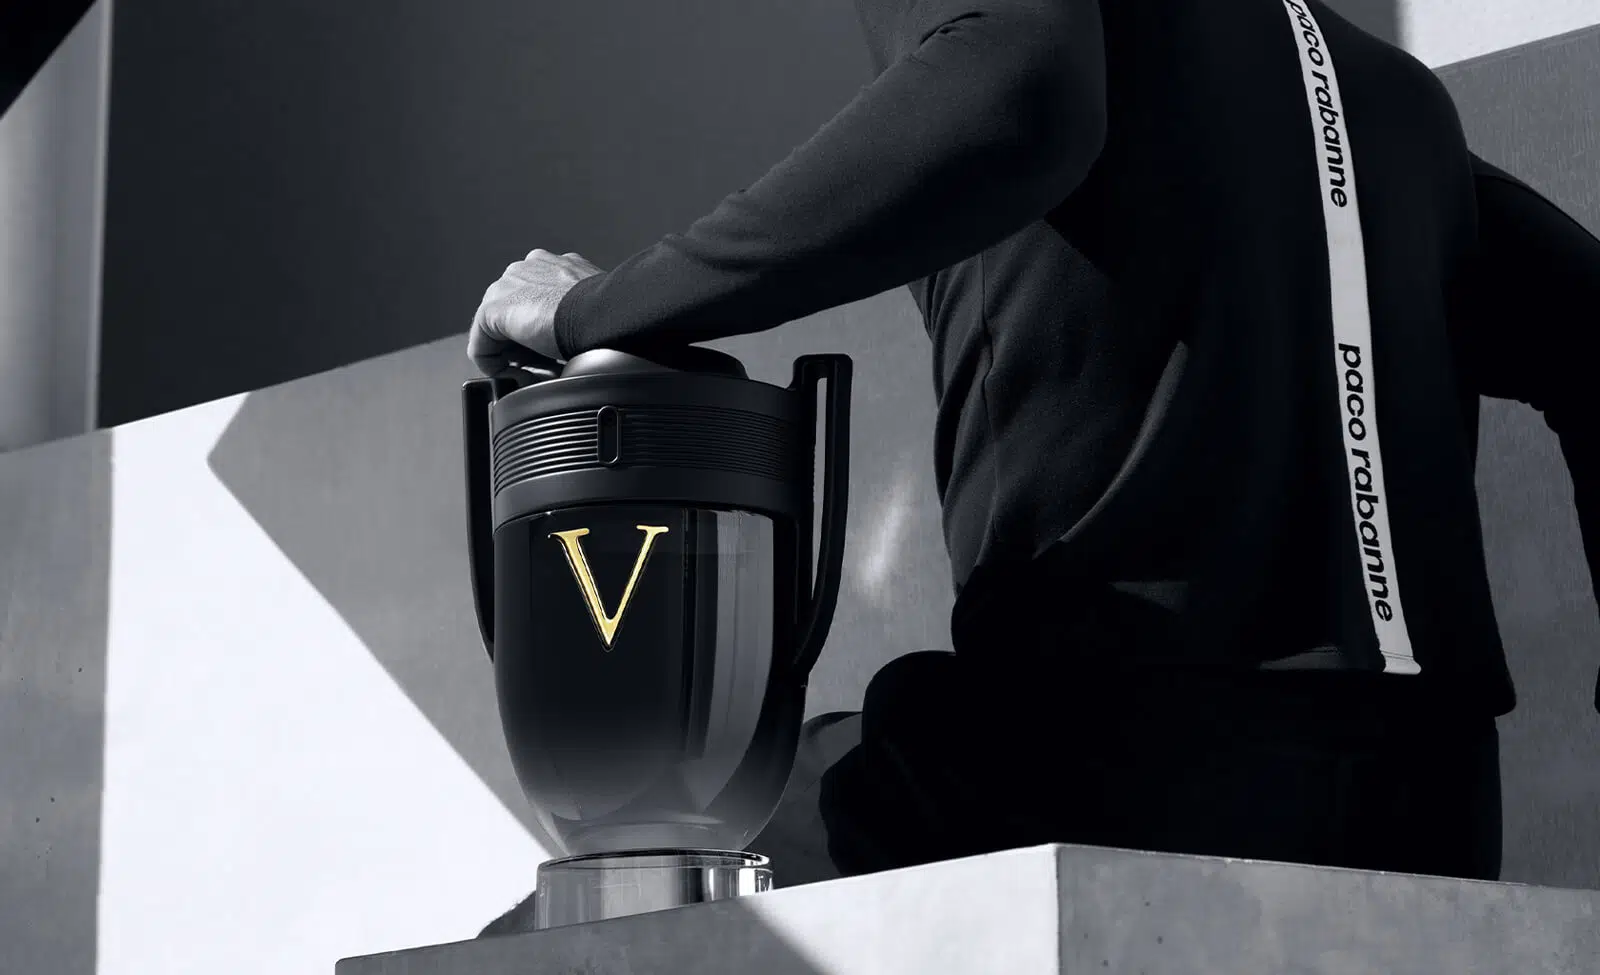 Nick Youngquest, Paco Rabanne Invictus